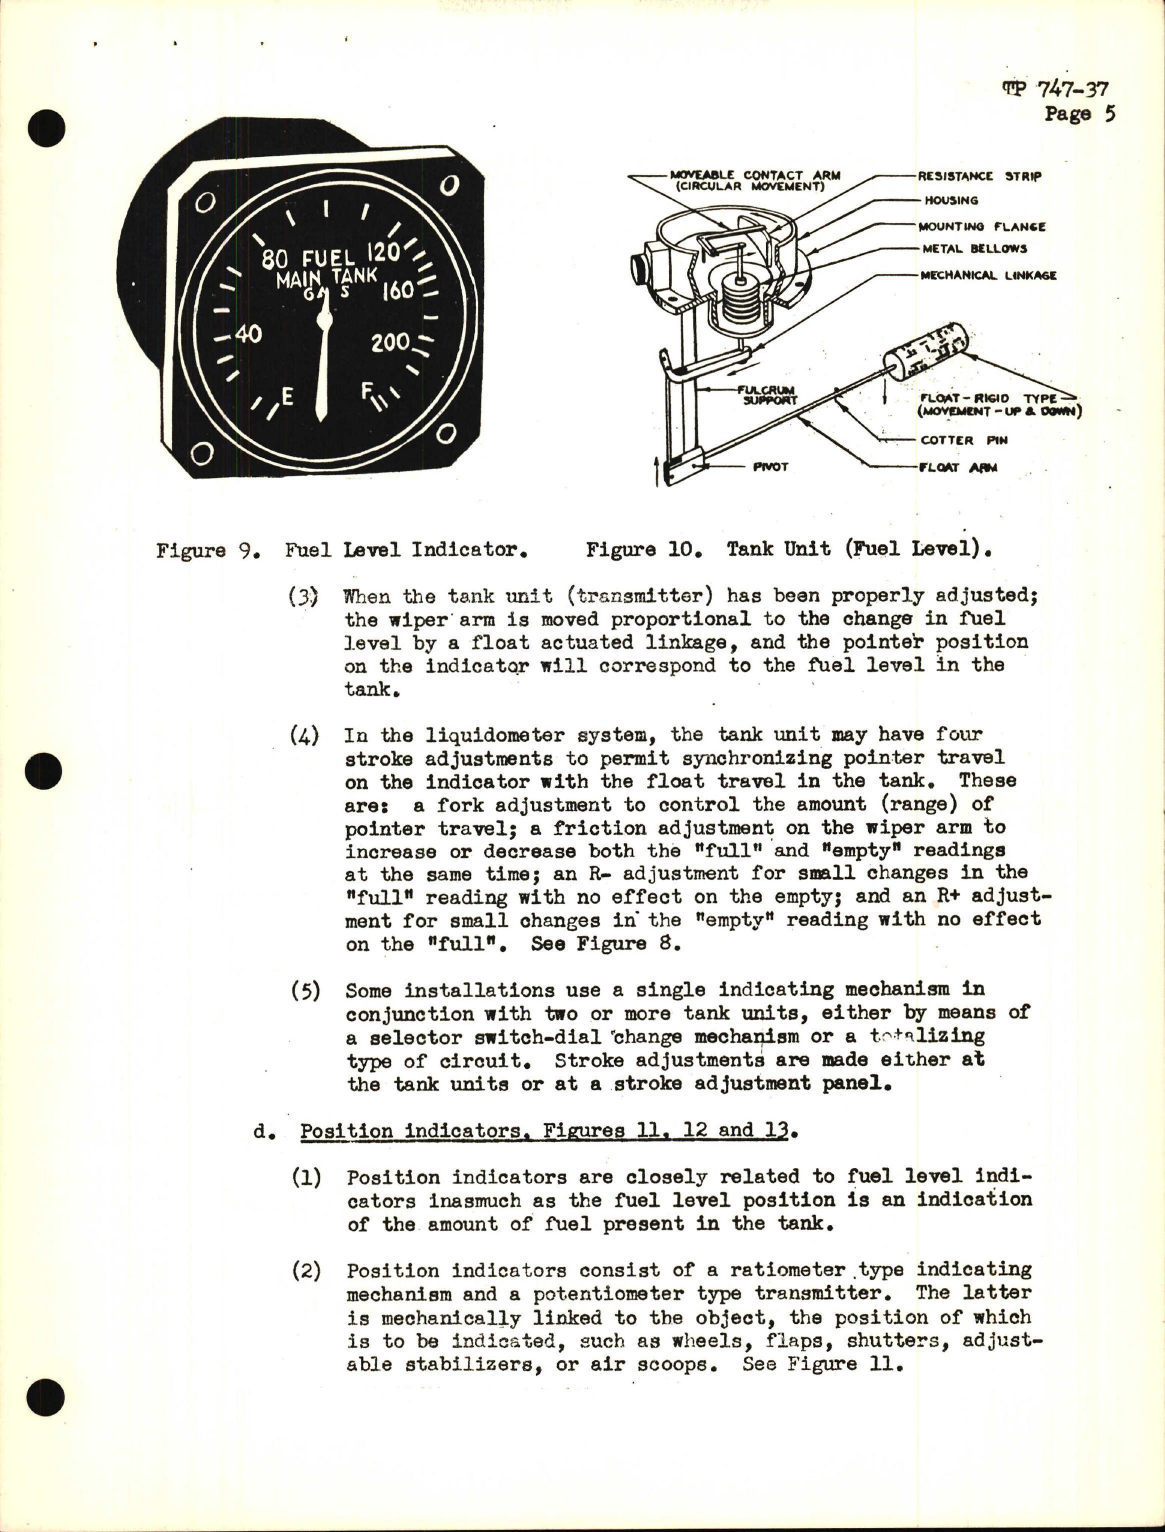 Sample page 5 from AirCorps Library document: Training Project, Electrical and Magnetic Type Instruments (DC Instruments) 